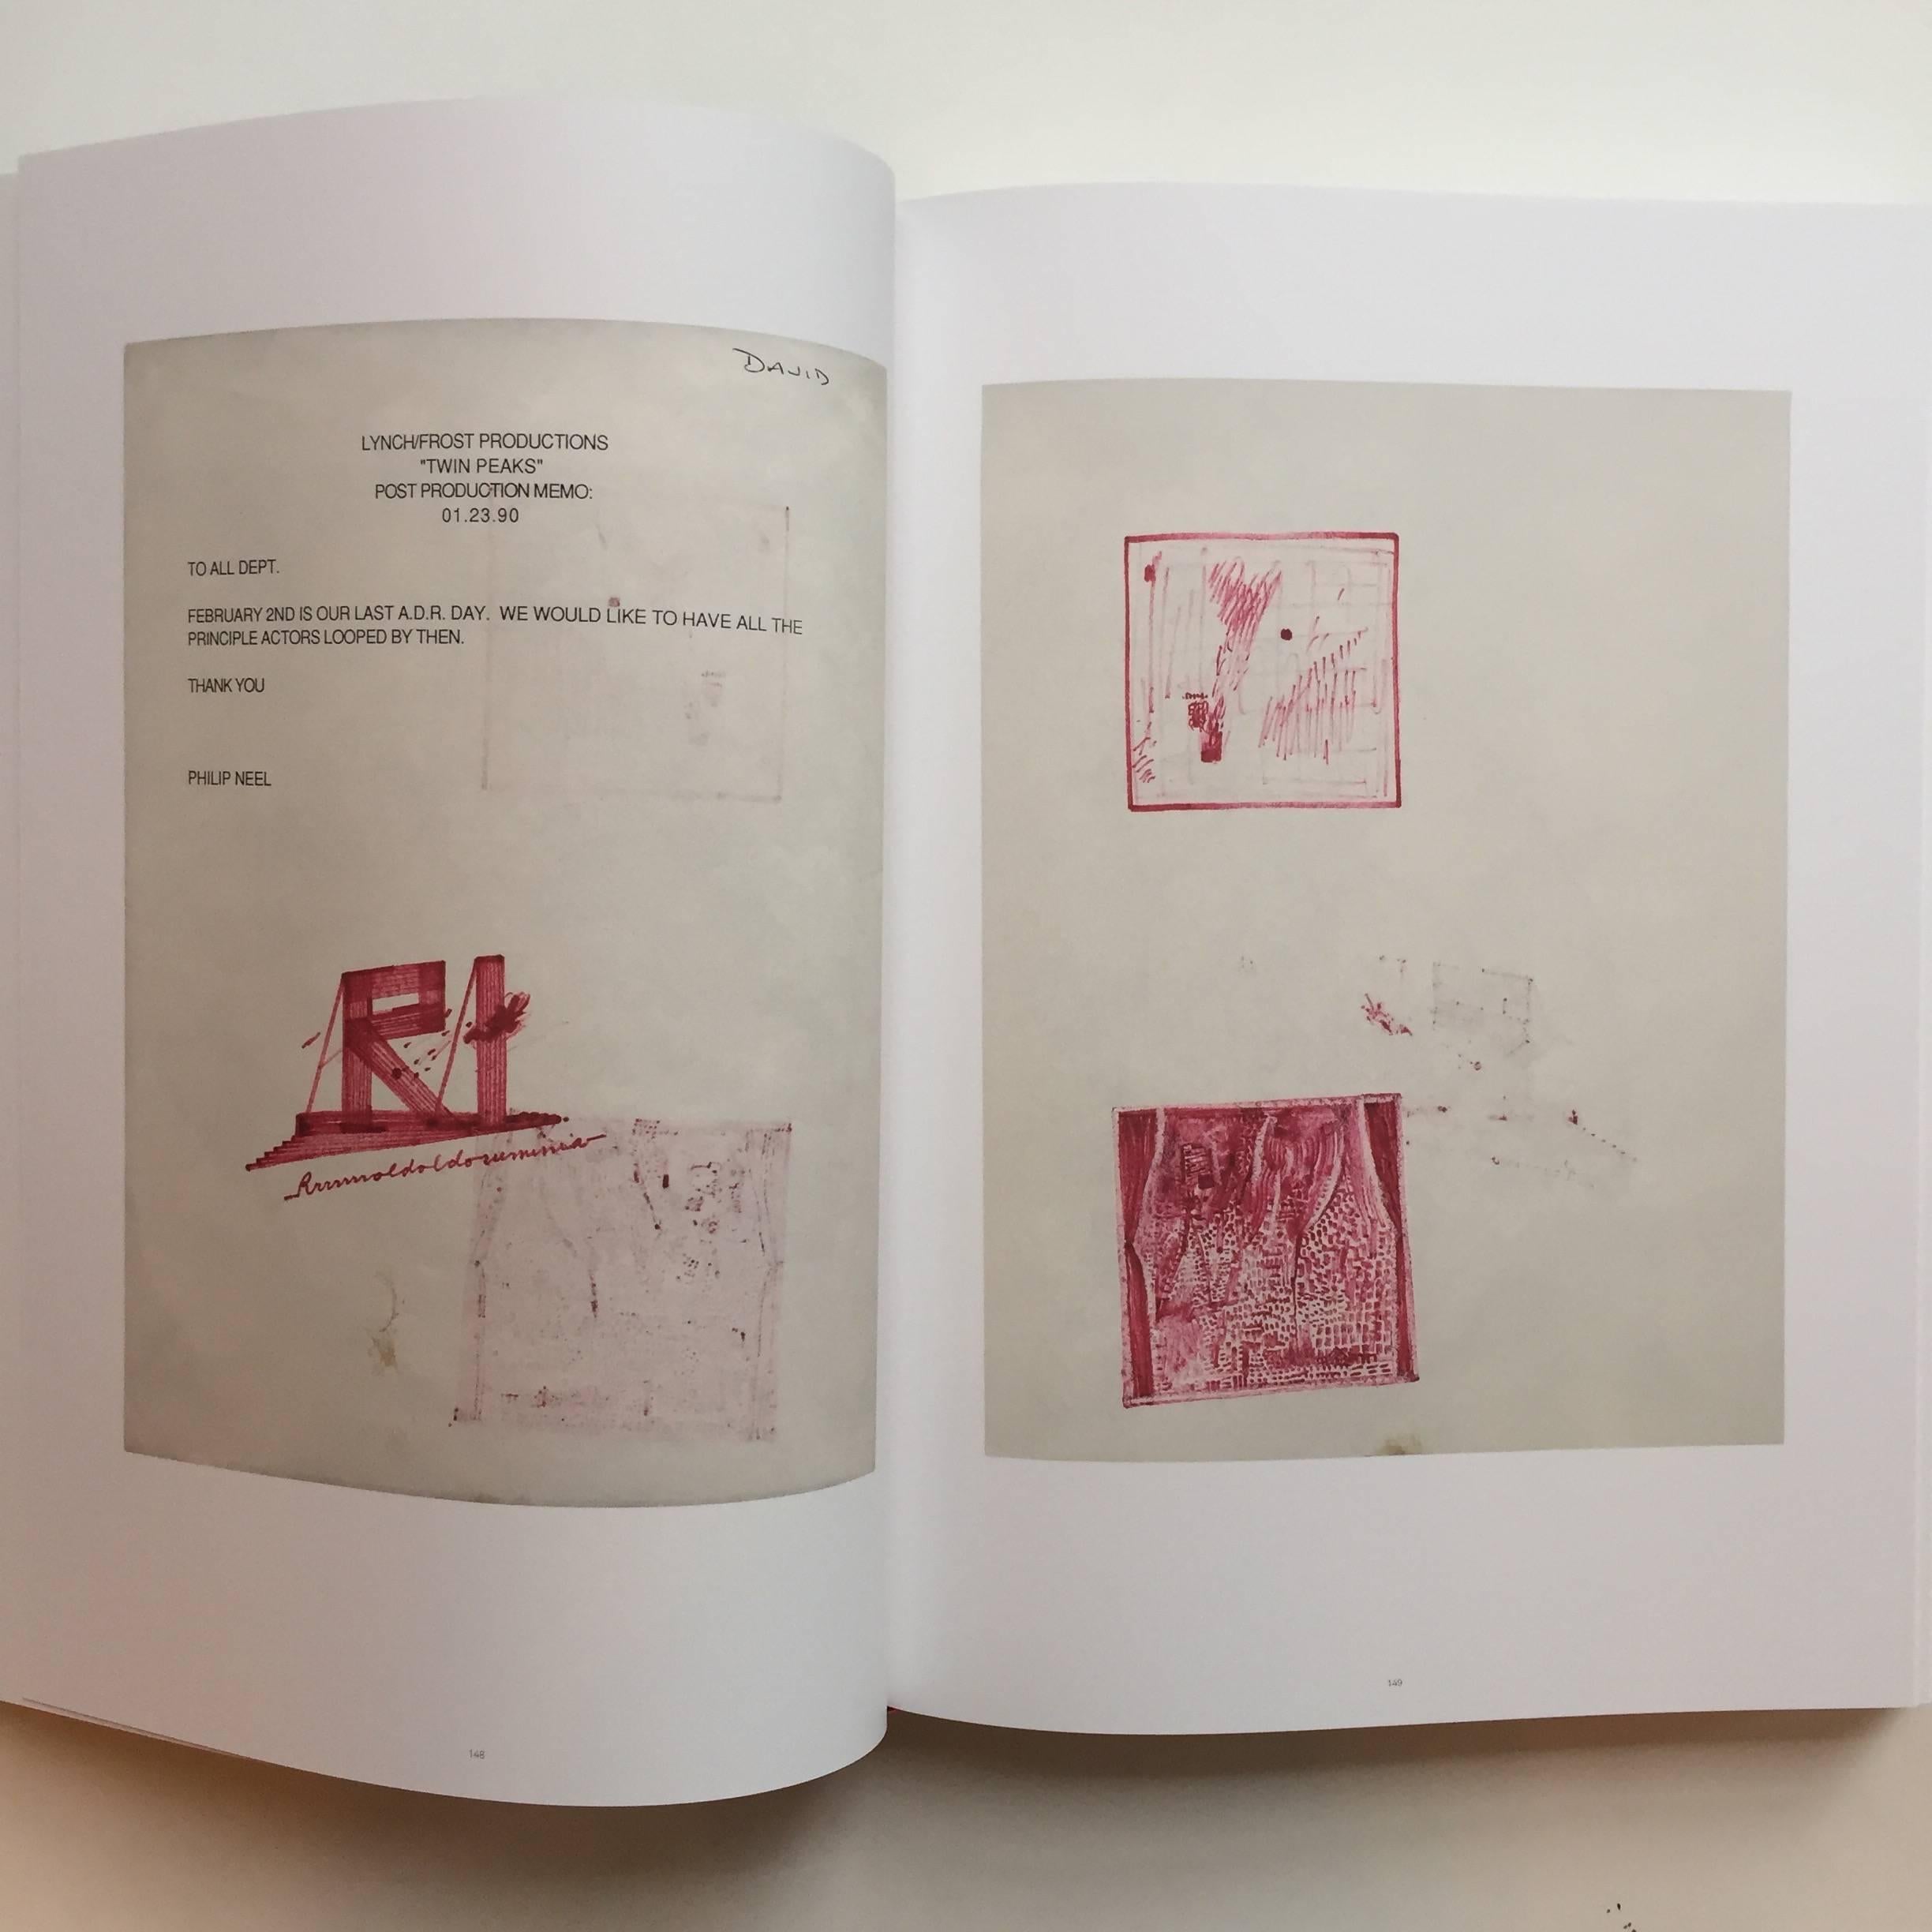 First edition, published by Steidl and Fondation Cartier pour l'art contemporain, 2011.

This oversized monograph presents a collection of over five-hundred drawings by highly-acclaimed American filmmaker and artist David Lynch. A compilation of